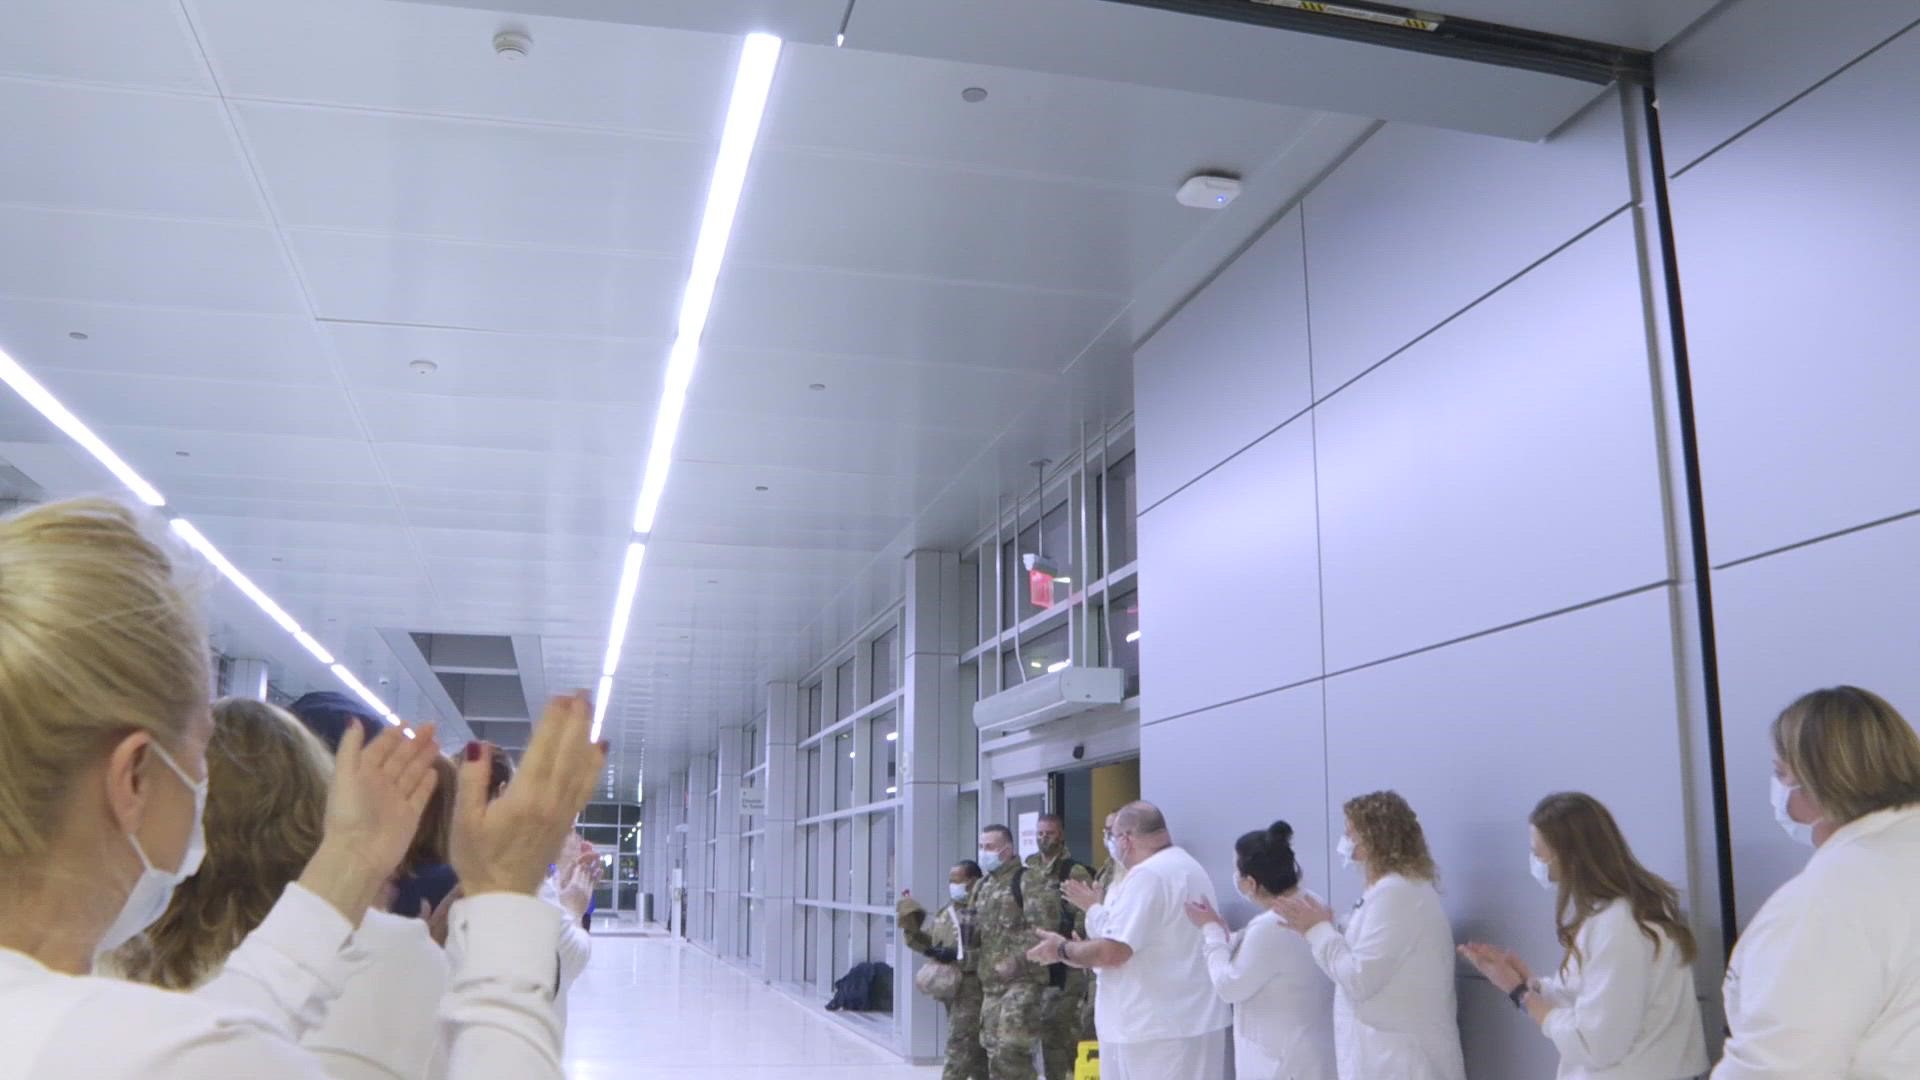 Cleveland Clinic welcomed a team of approximately 20 U.S. Air Force medical professionals this morning.